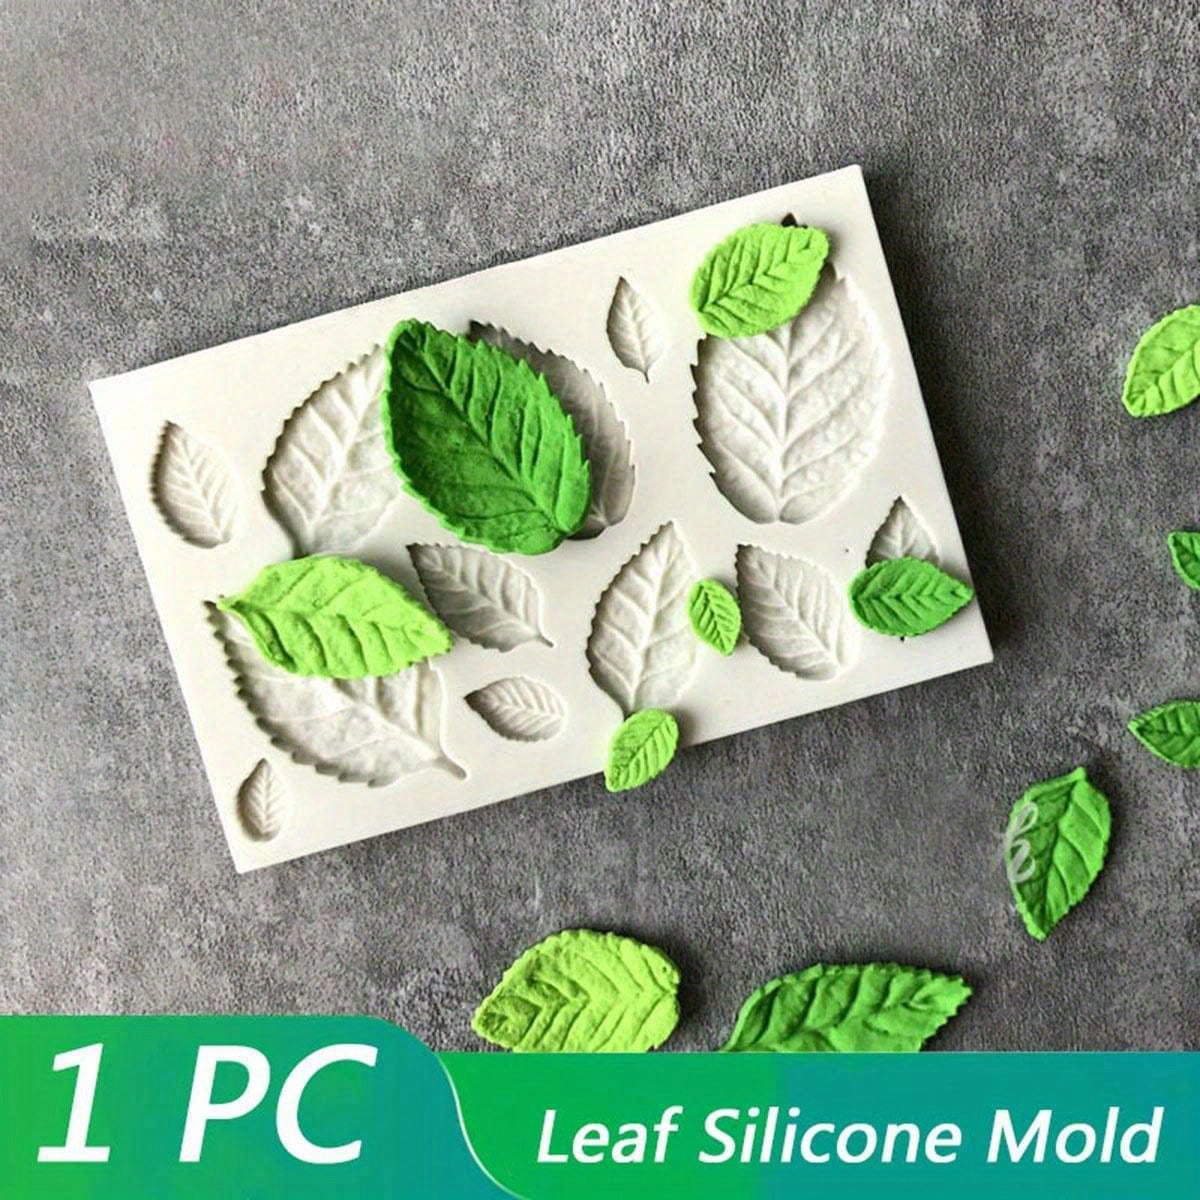 

Silicone Leaf Shape Candy Mold, 3d Resin Casting Cuboid Molds For Diy Cake Decorating, Fondant, Gum Paste, Baking Tools, Kitchen Gadgets - 1 Pc